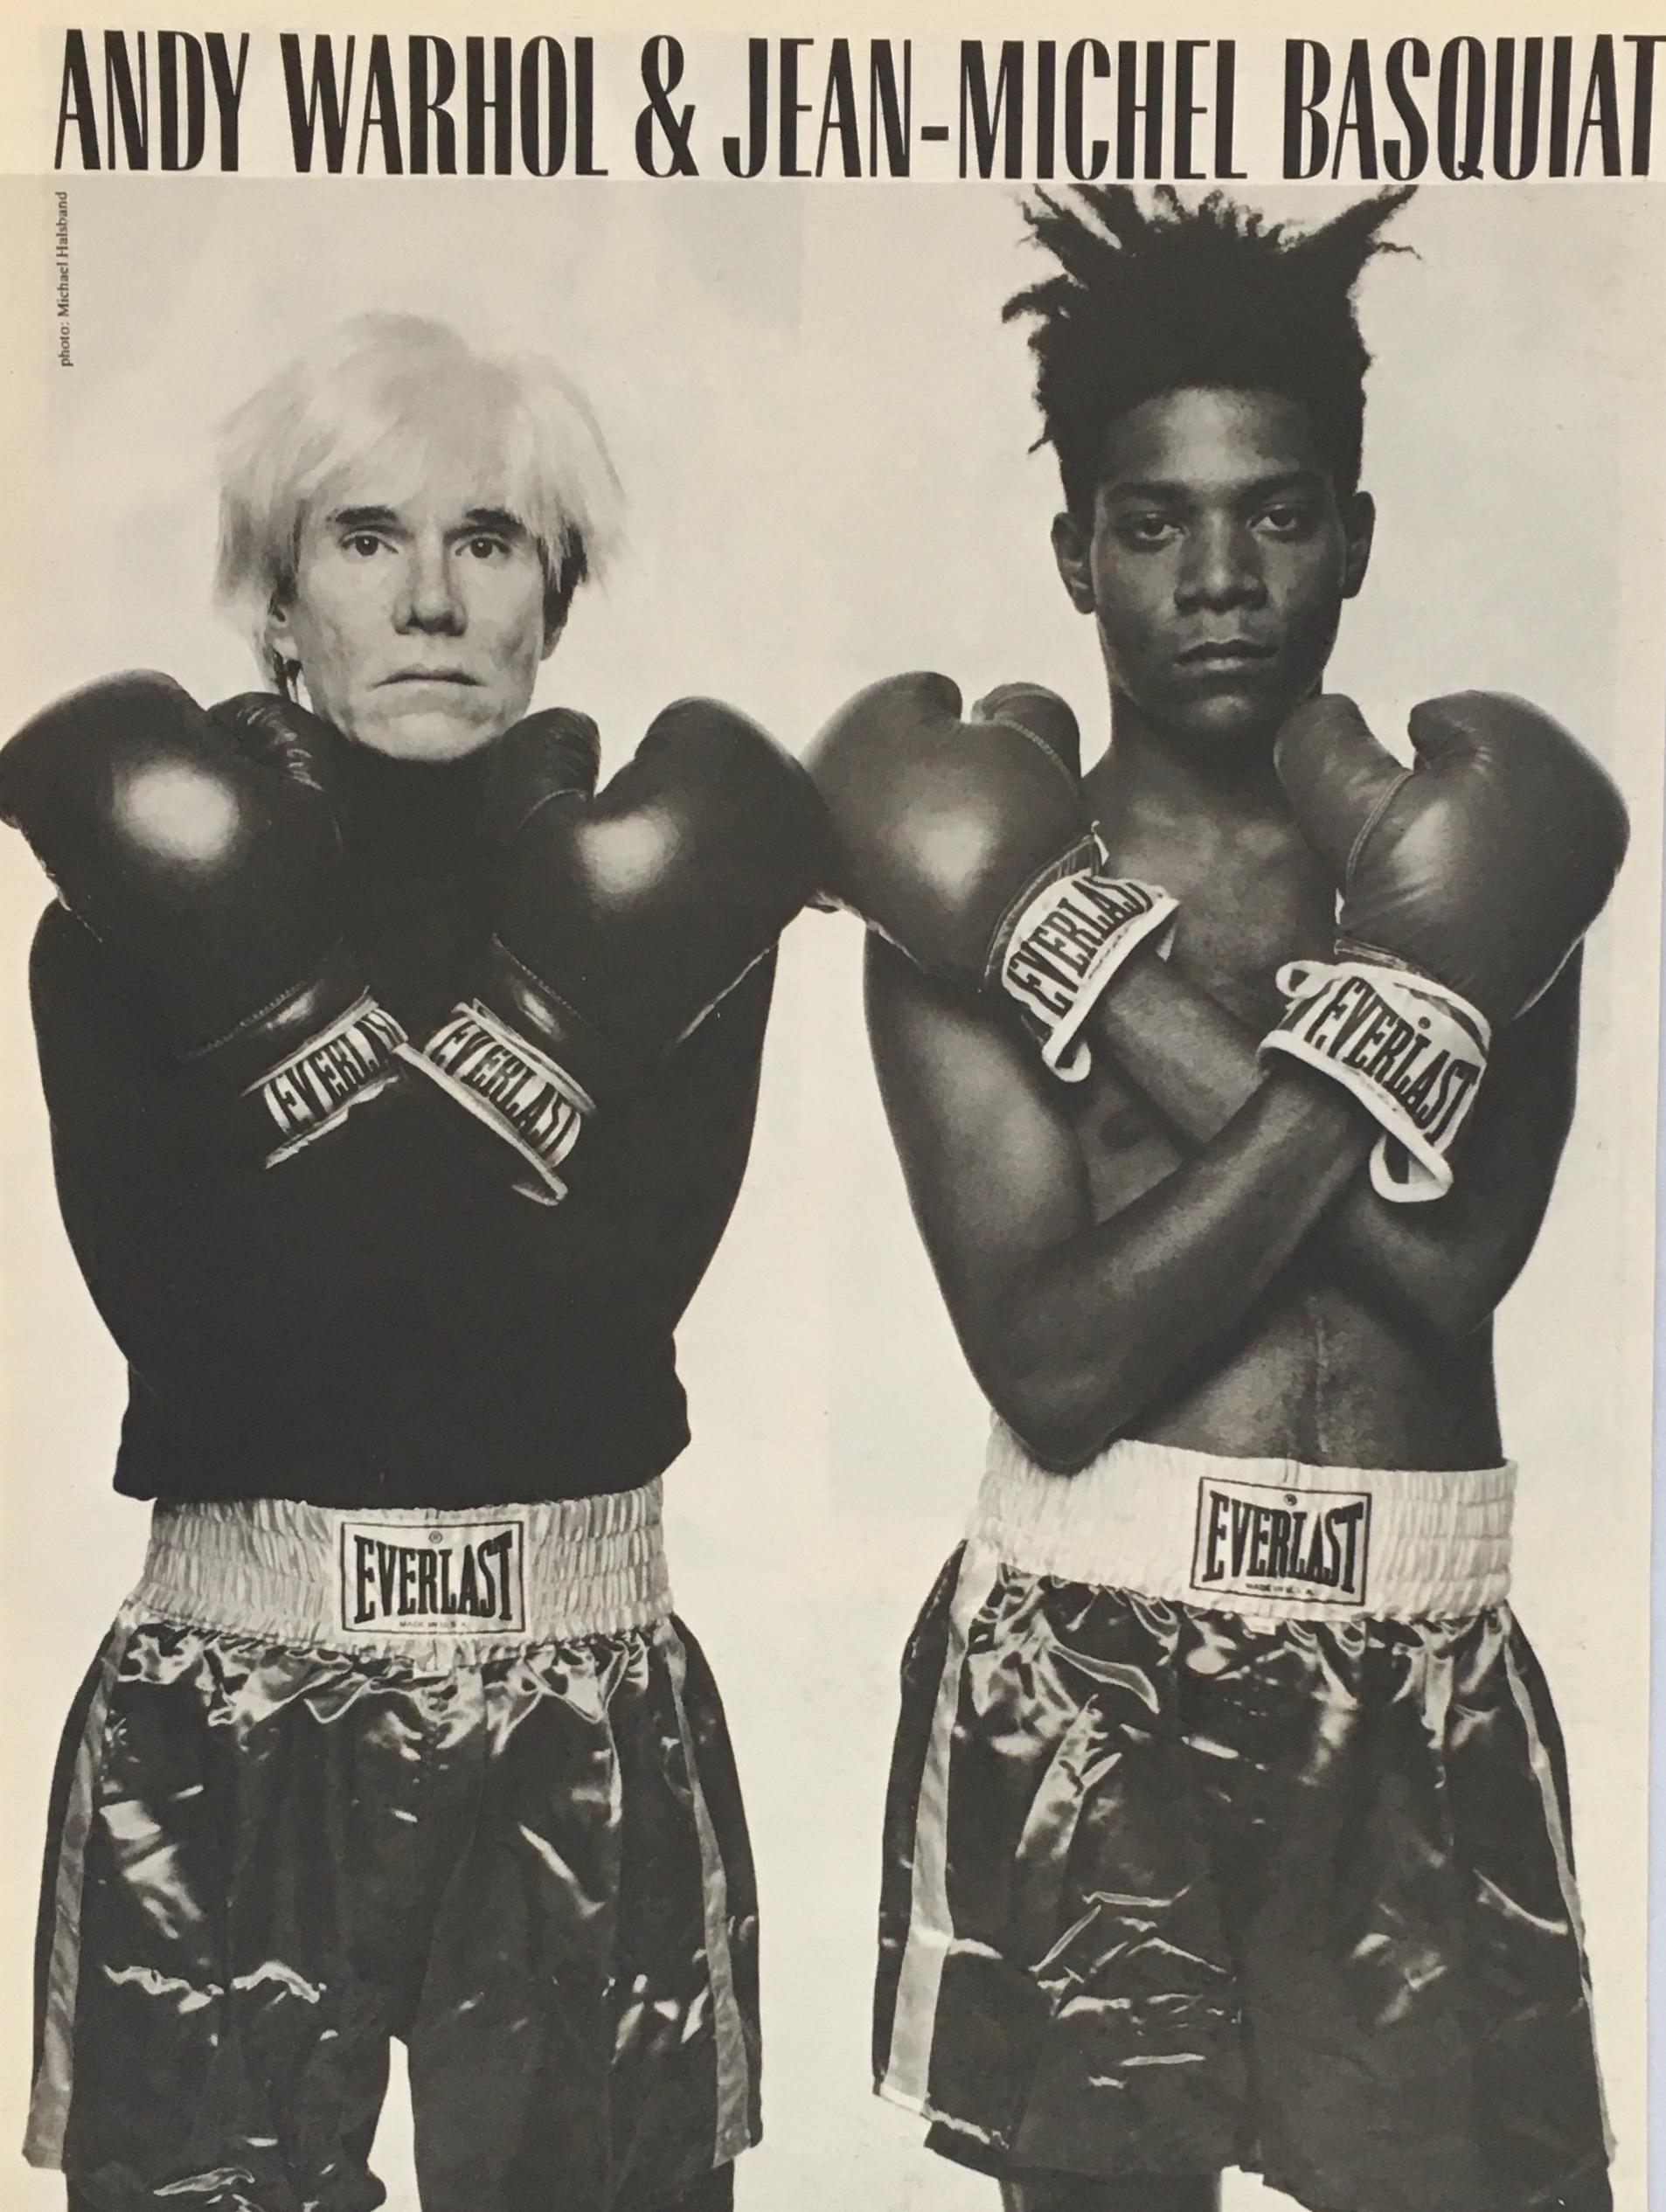 Andy Warhol, Jean-Michel Basquiat Boxing pictorial, 1985.
Rare vintage 1985 large sized magazine advertisement for the historic Andy Warhol and Jean-Michel Basquiat collaborations show at Tony Shafrazi Gallery. An affordably priced alternative to